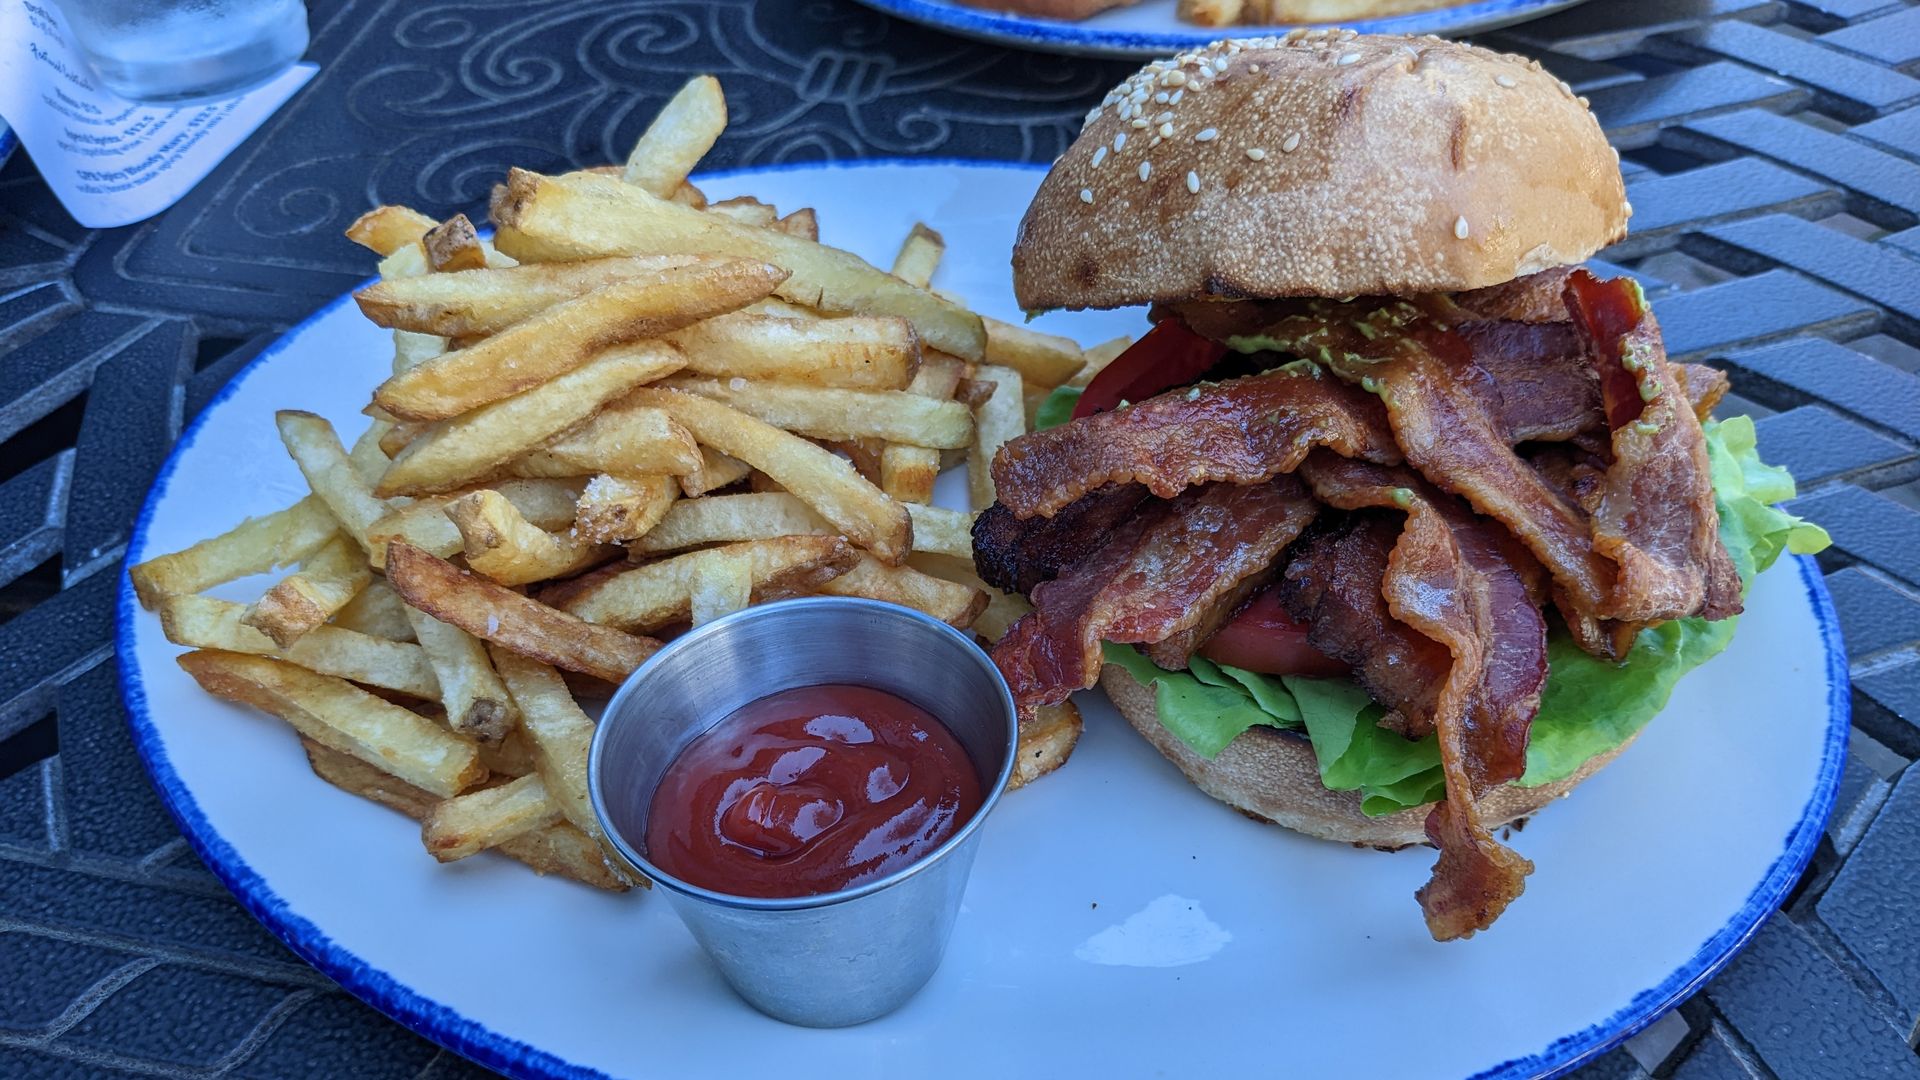 A BLT sandwich plated with a side of french fries